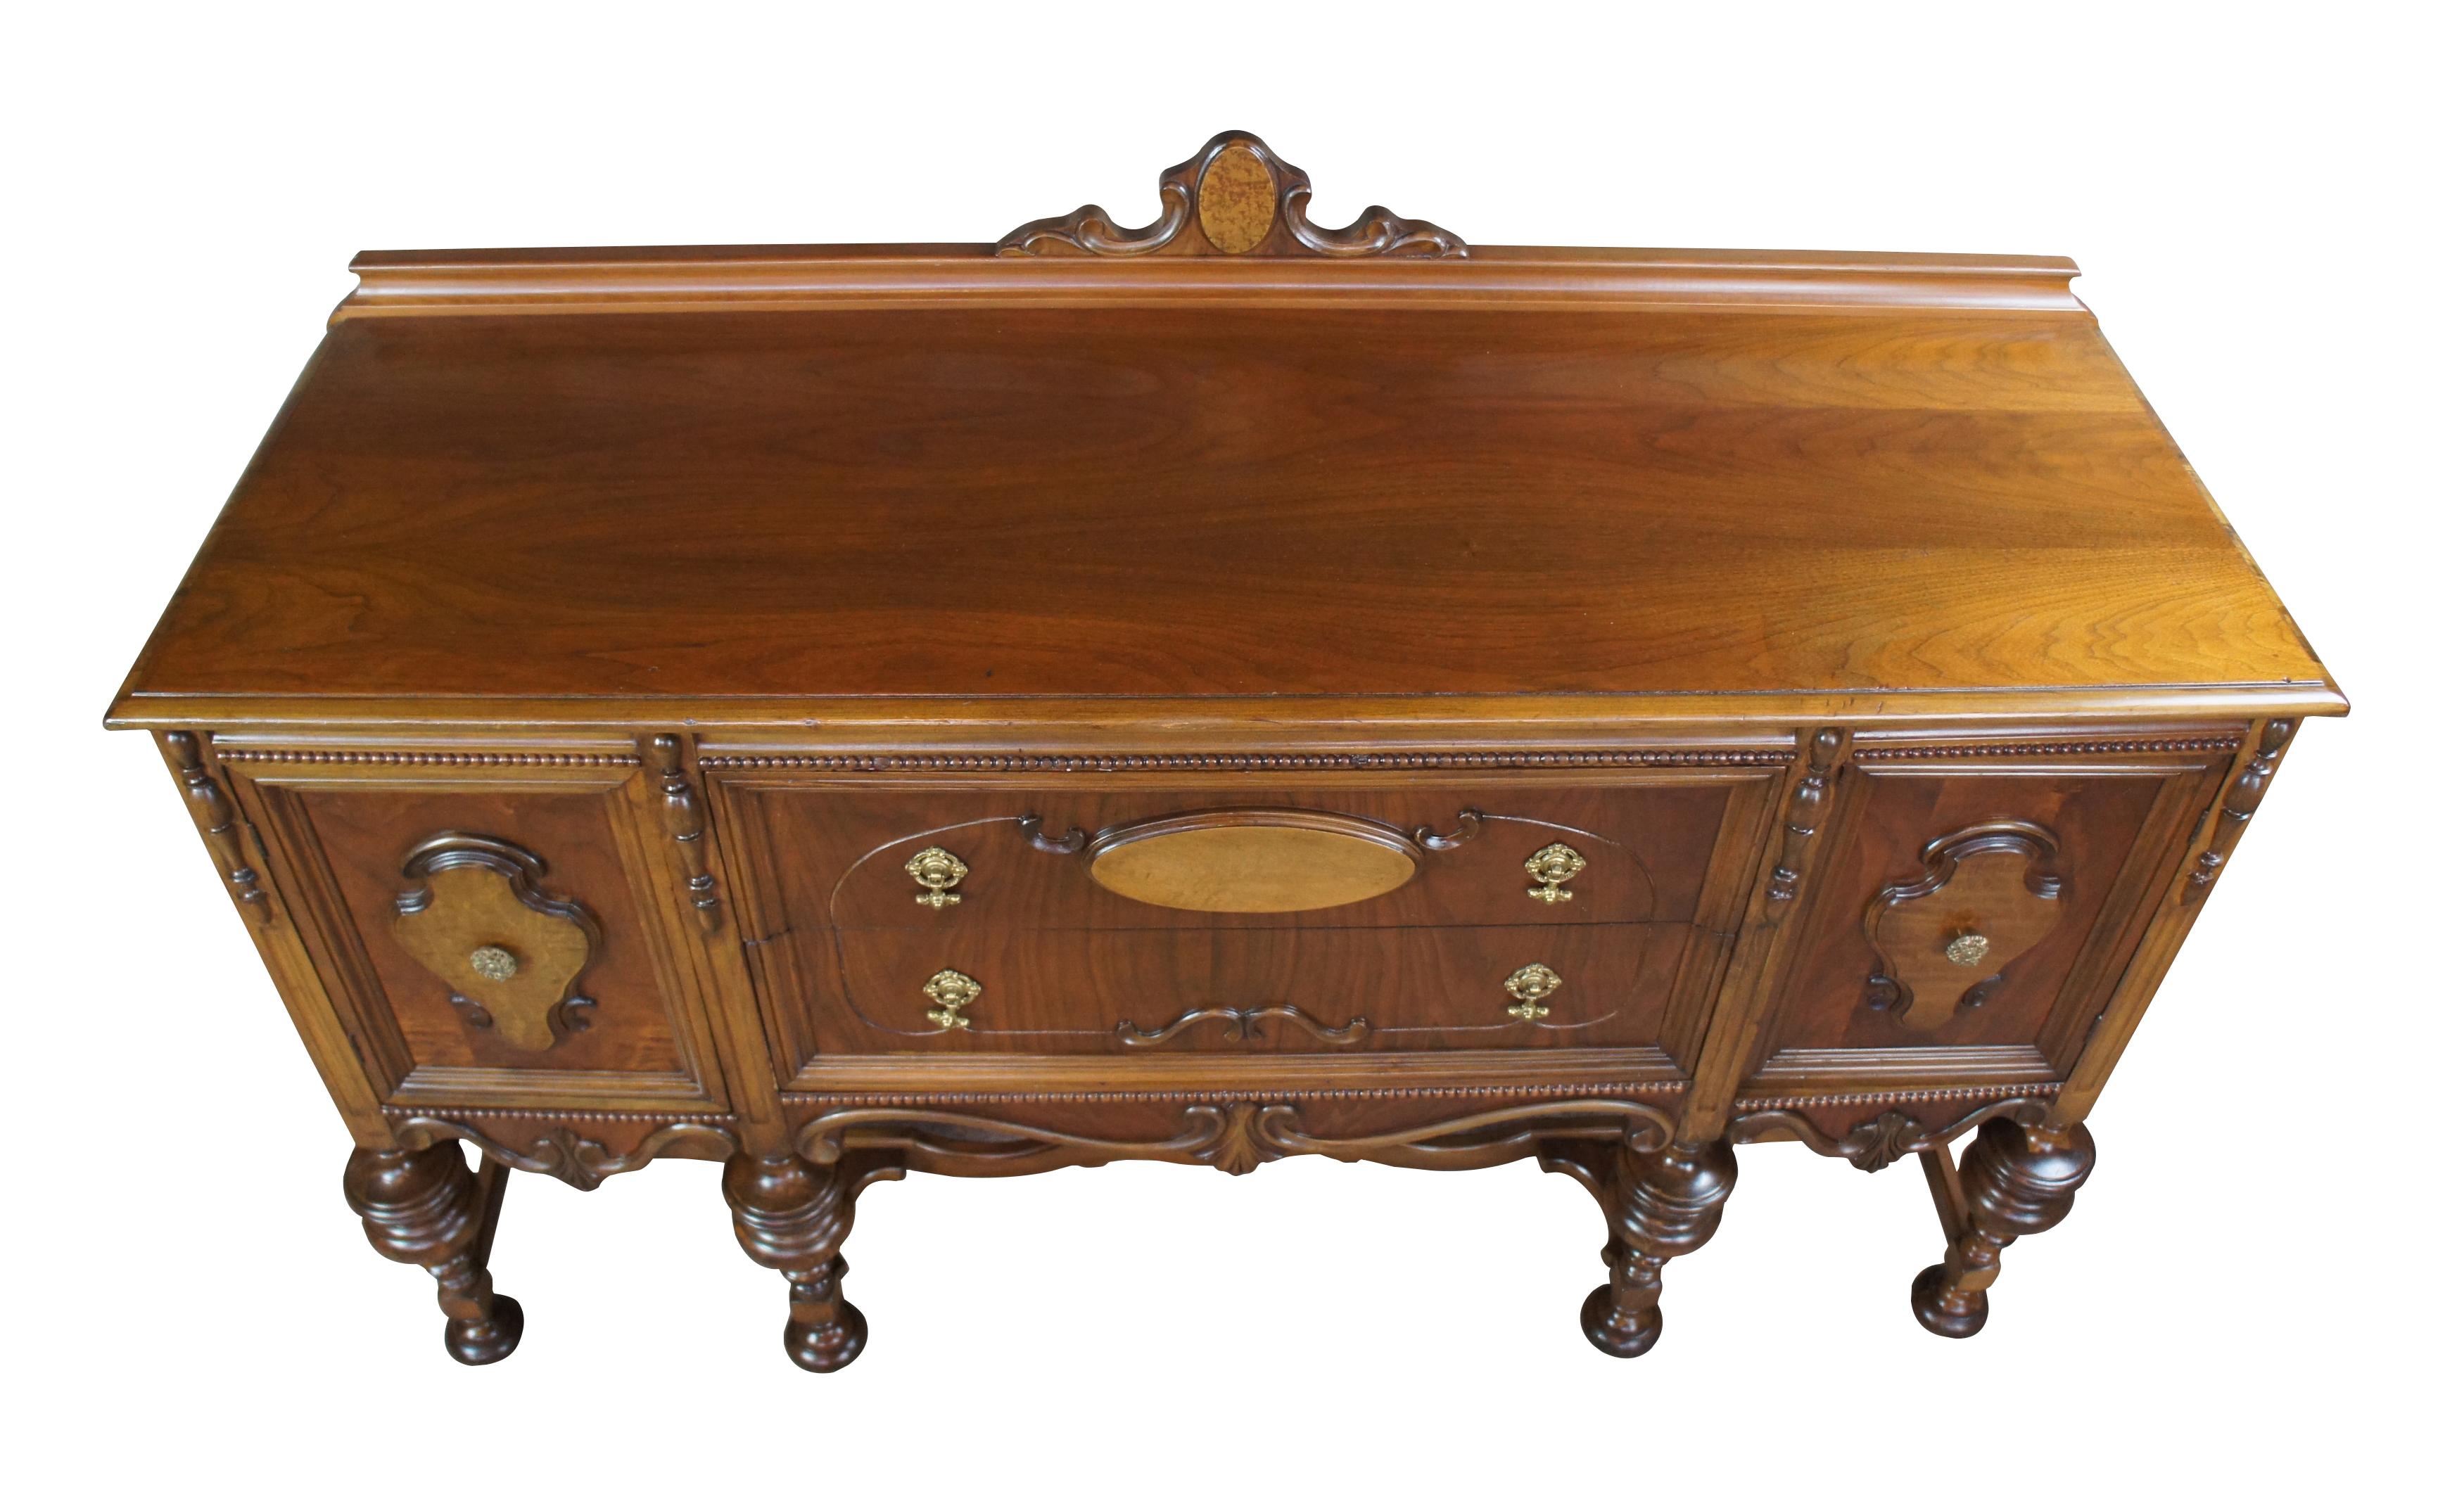 Turn of the century Jacobean or Elizabethan style sideboard. Made from walnut with robust turned legs and ornate trestle base, serpentine carved trim, beaded accents and burled panels. Features two long central drawers flanked by outer cabinets.